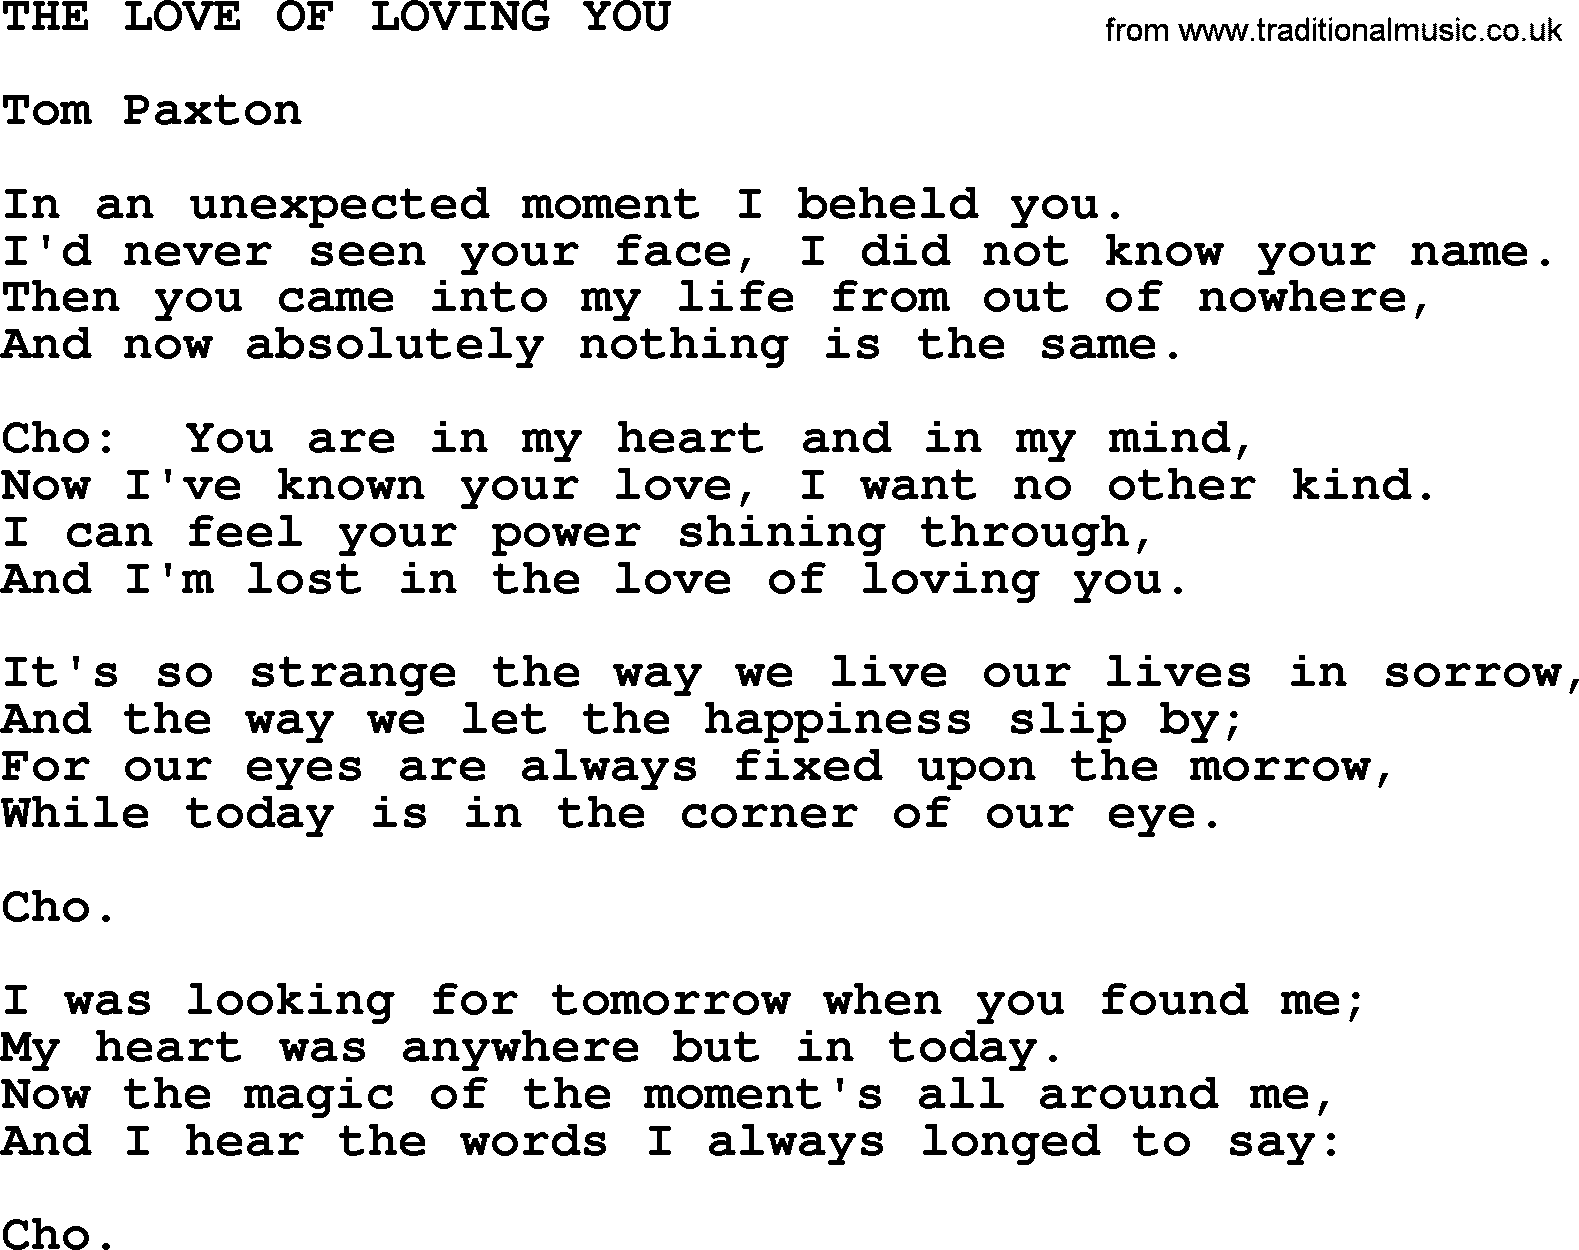 Tom Paxton song: The Love Of Loving You, lyrics